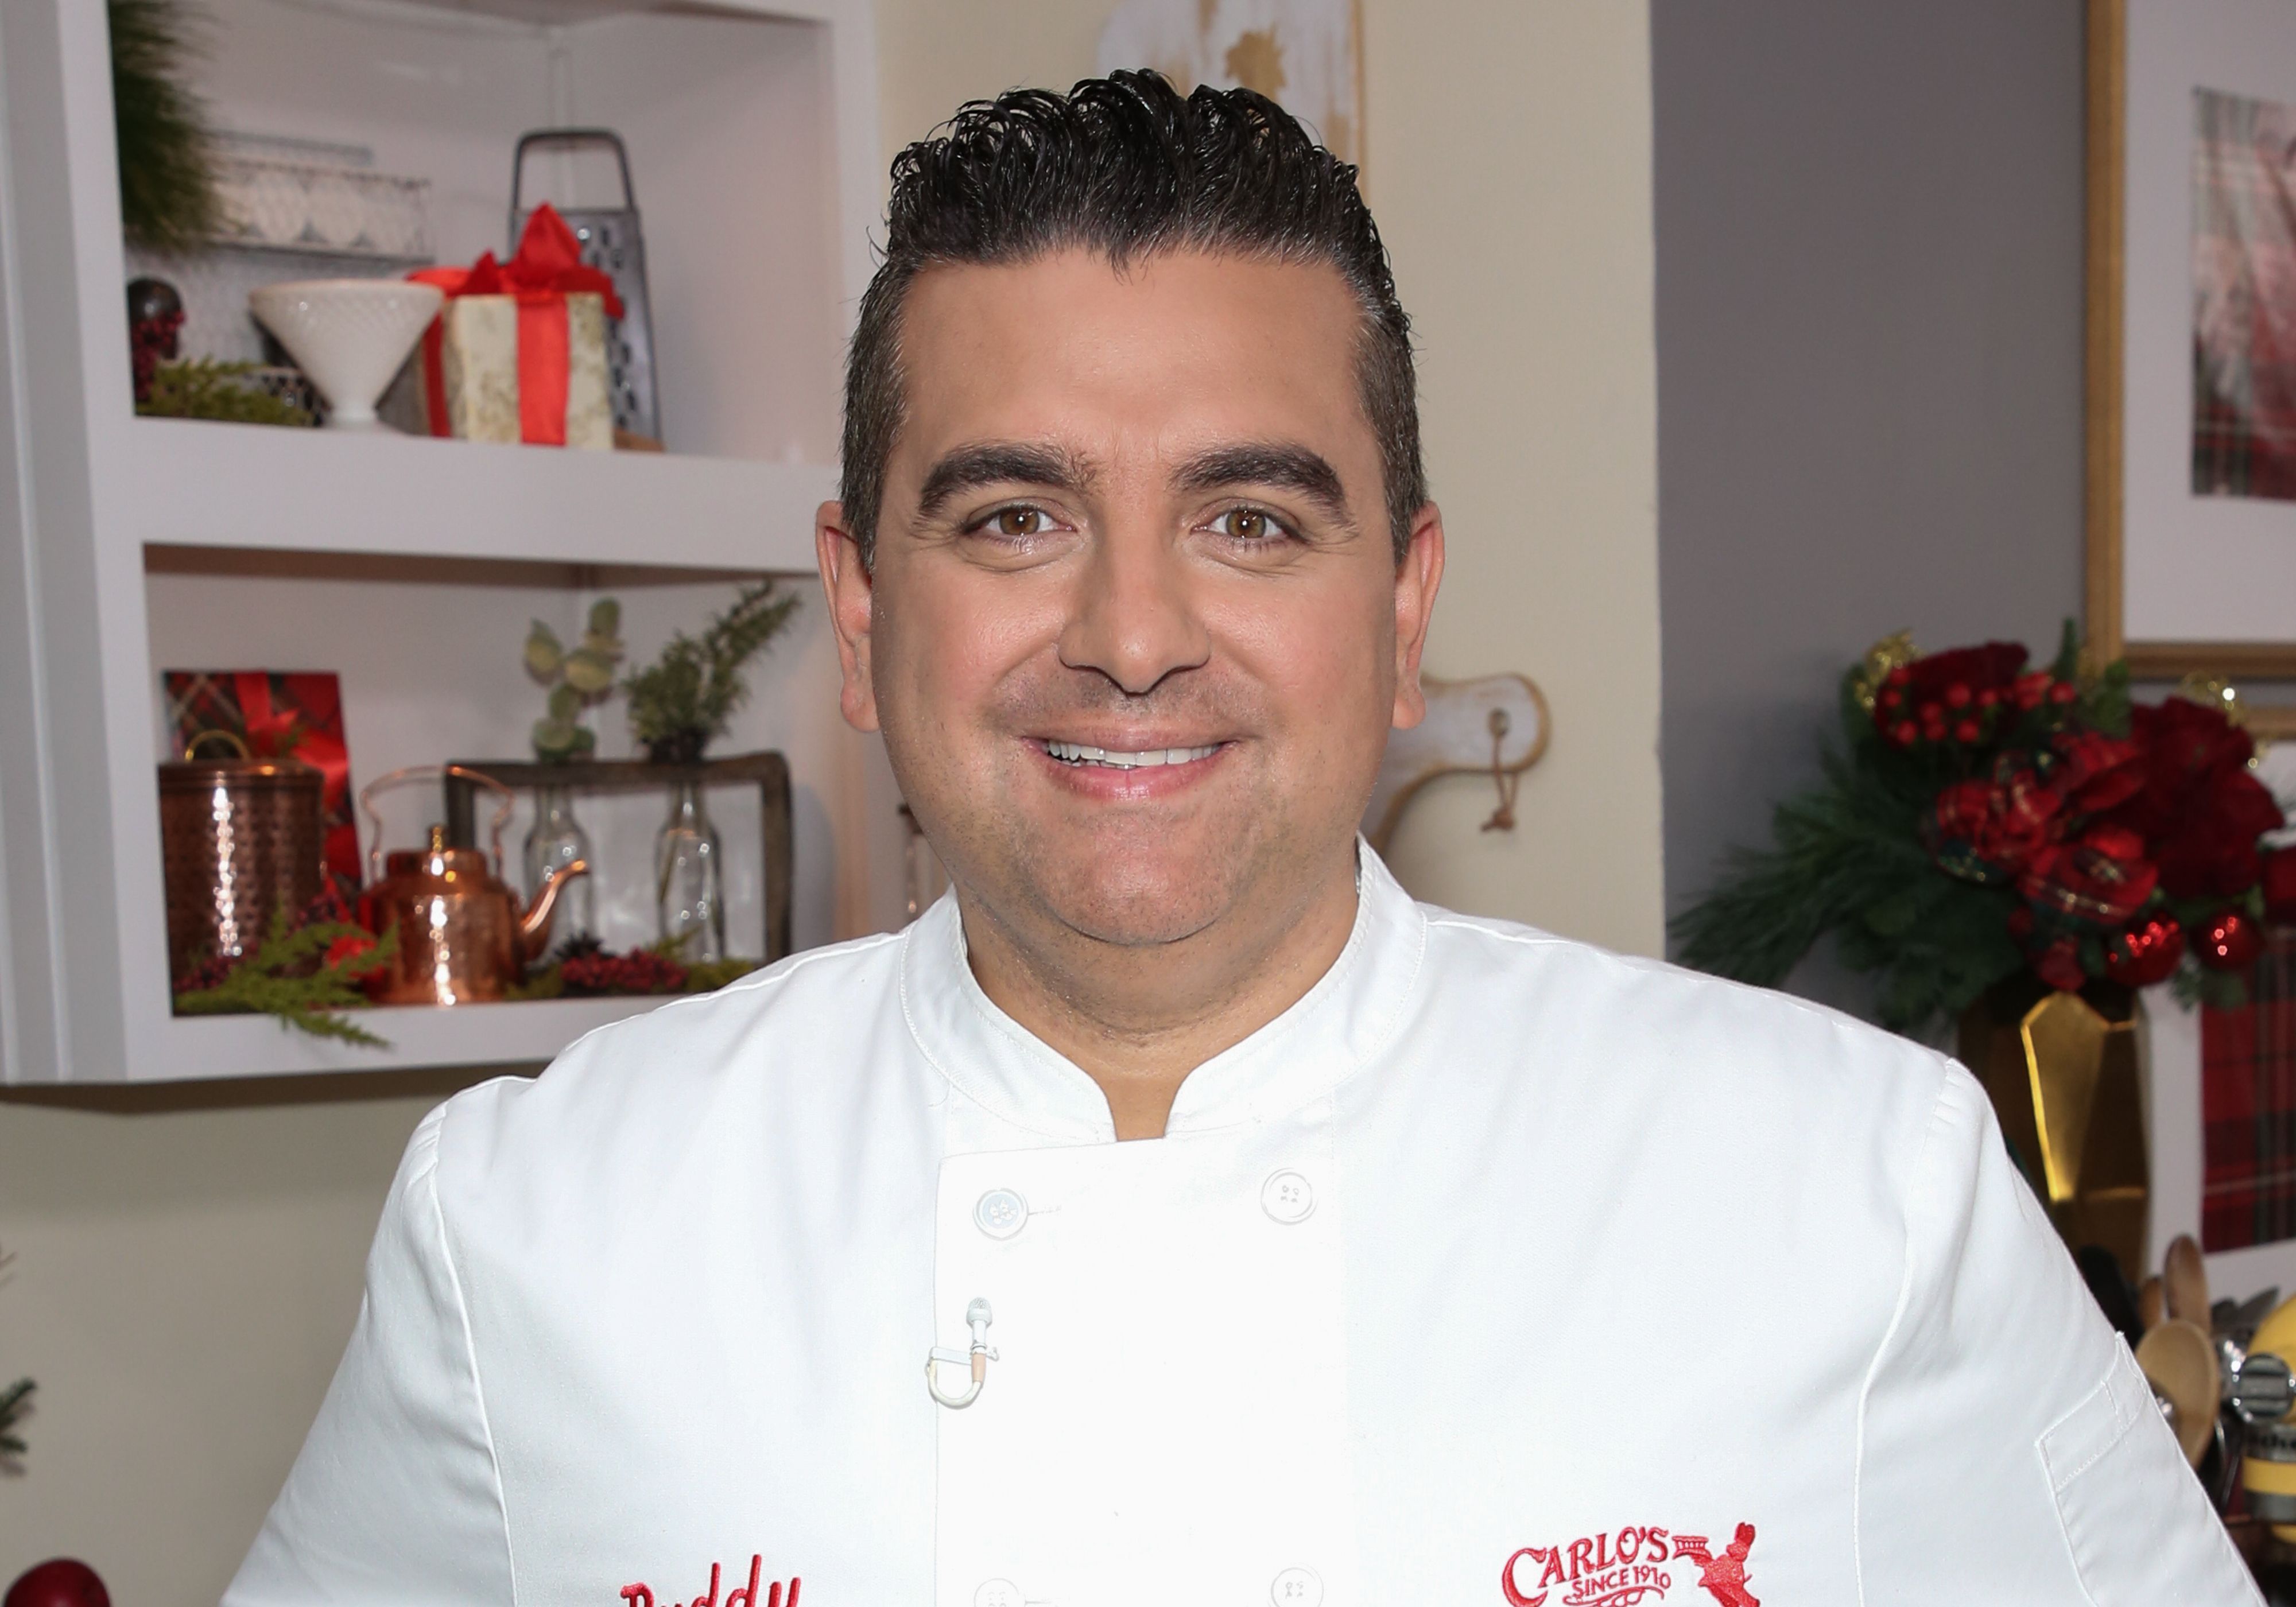 Chef / TV Personality Buddy Valastro at Hallmark Channel's "Home & Family" at Universal Studios Hollywood on November 11, 2019 | Photo: Getty Images